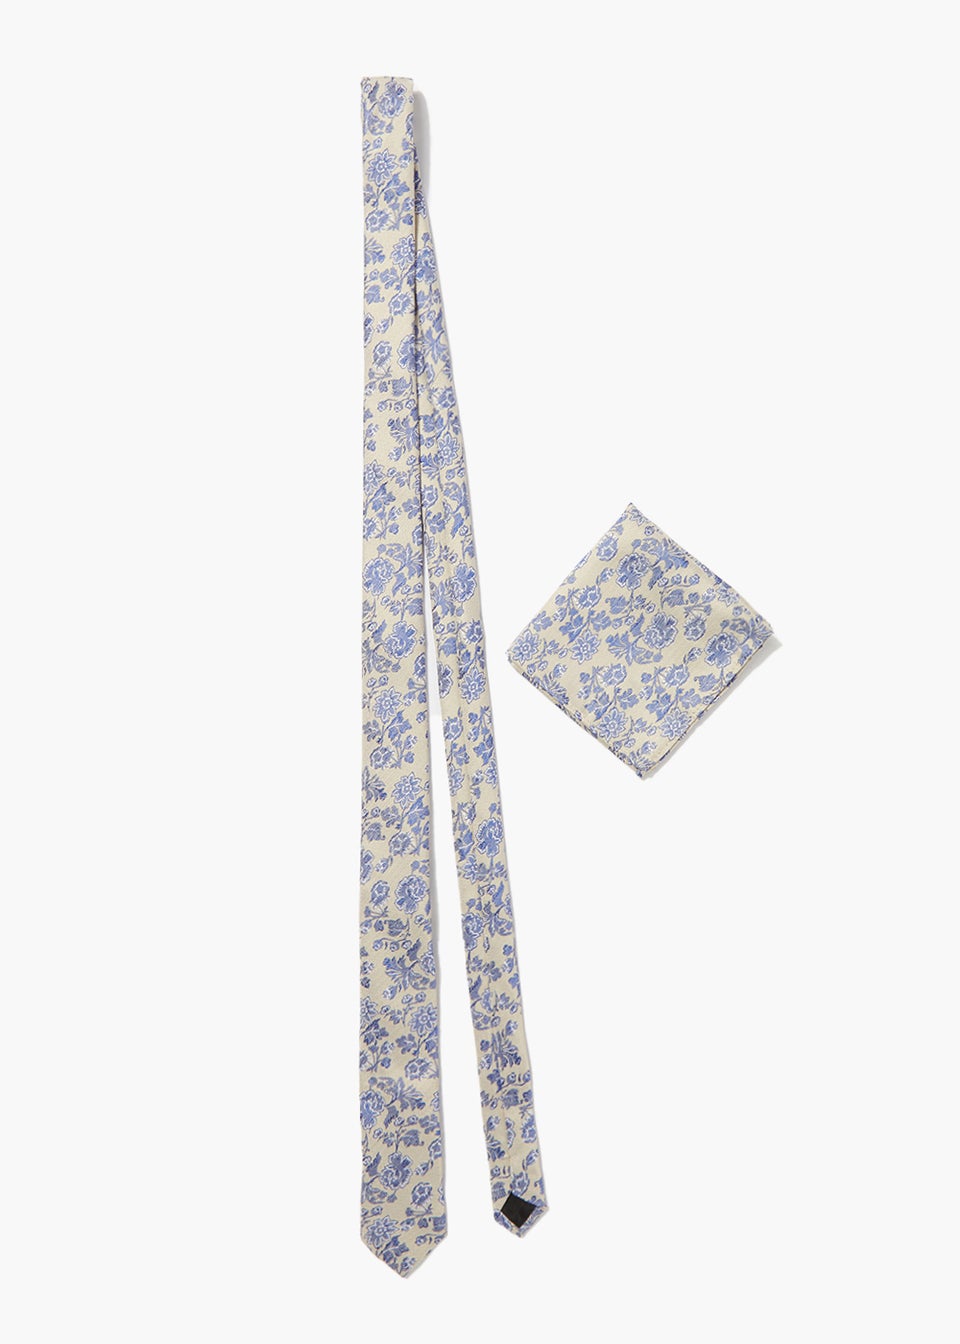 Taylor & Wright Stone Floral Tie & Pocket Square Set